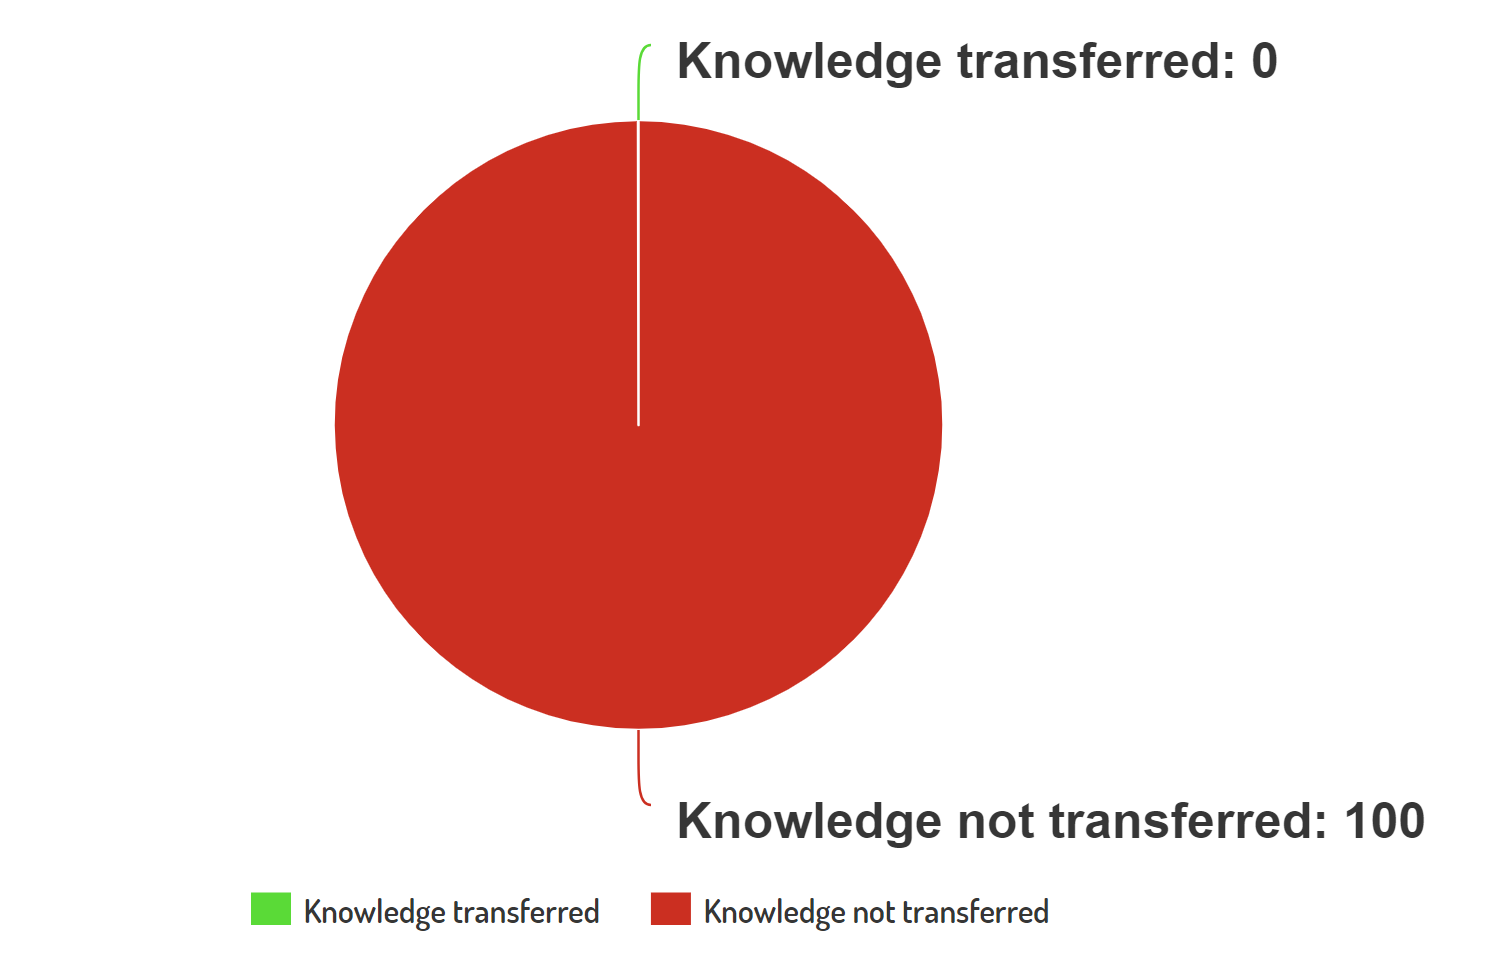 Joke pie chart showing that now knowledge was transfered.